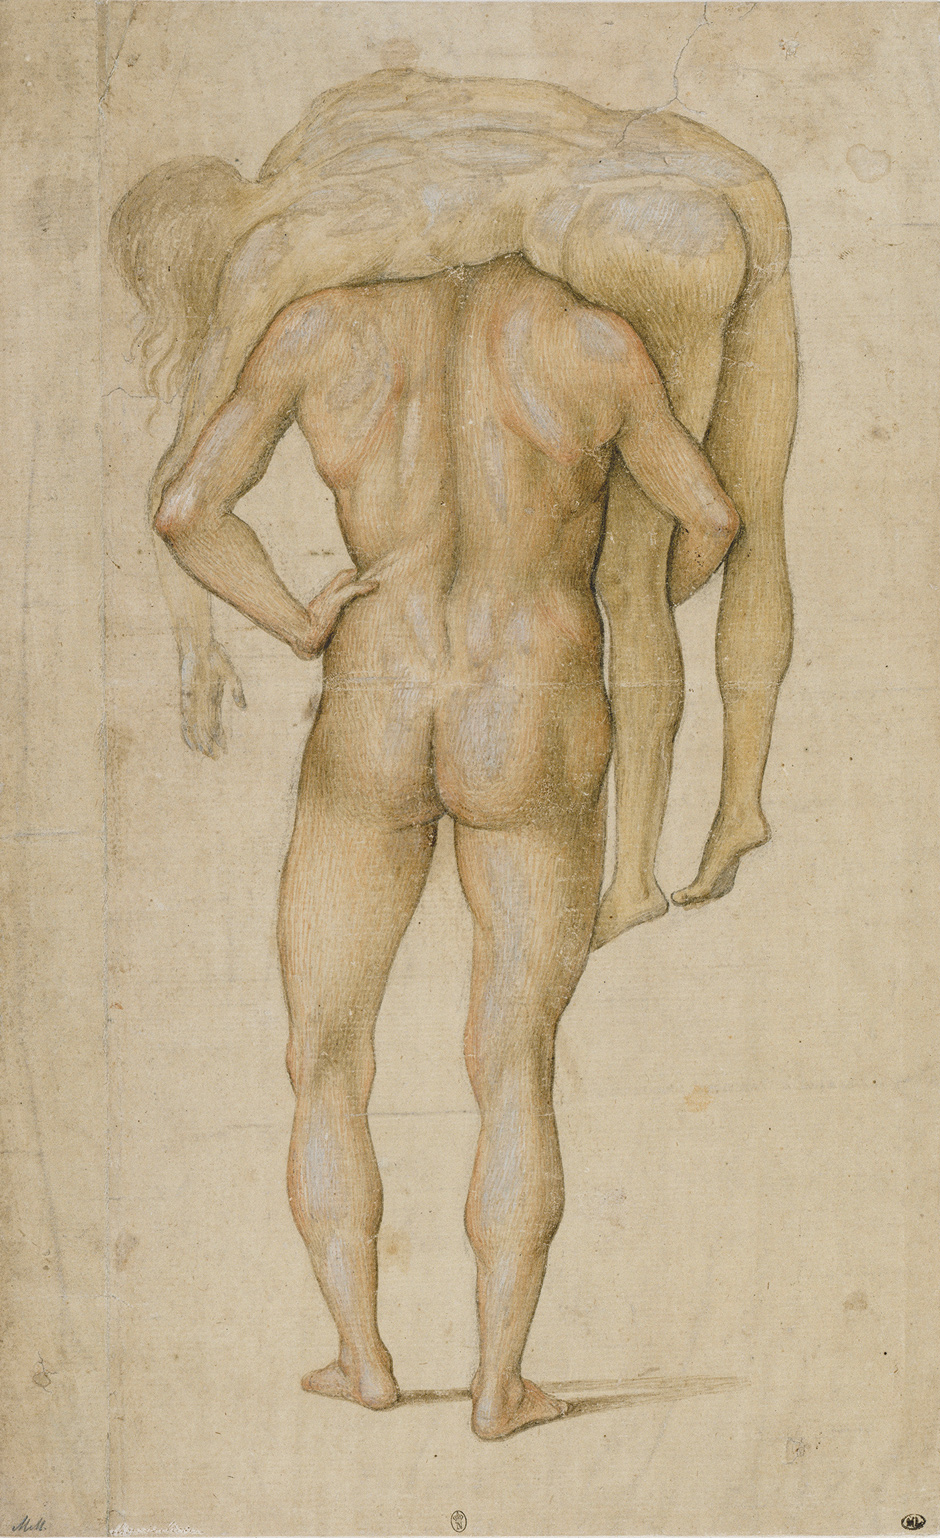 Luca Signorelli: Man Carrying Corpse on His Shoulders, circa 1500